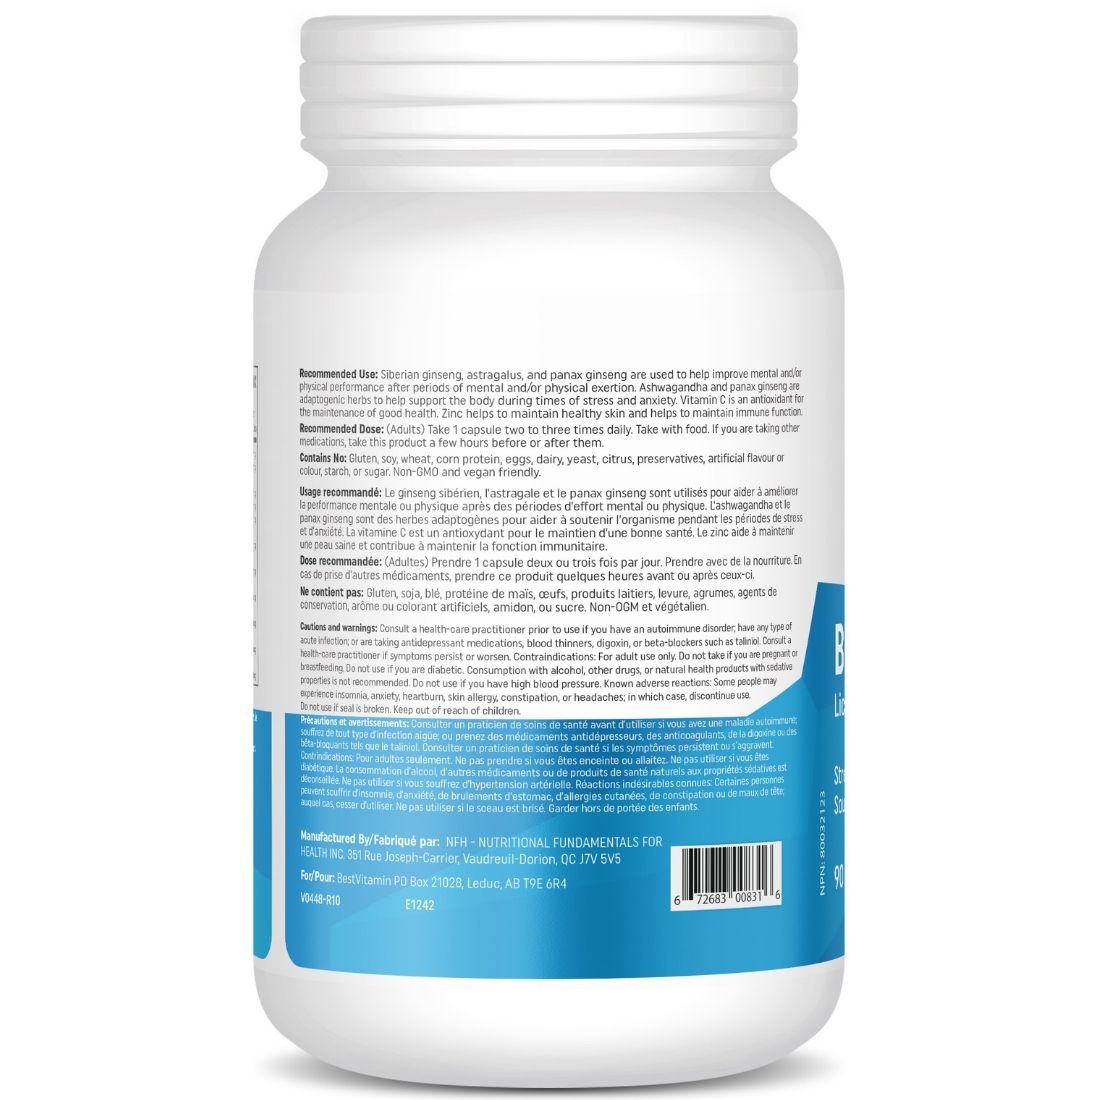 BestVitamin Best Adrenal Support, Licorice-Free, 90 Vegetable Capsules, Clearance 50% Off, Final Sale